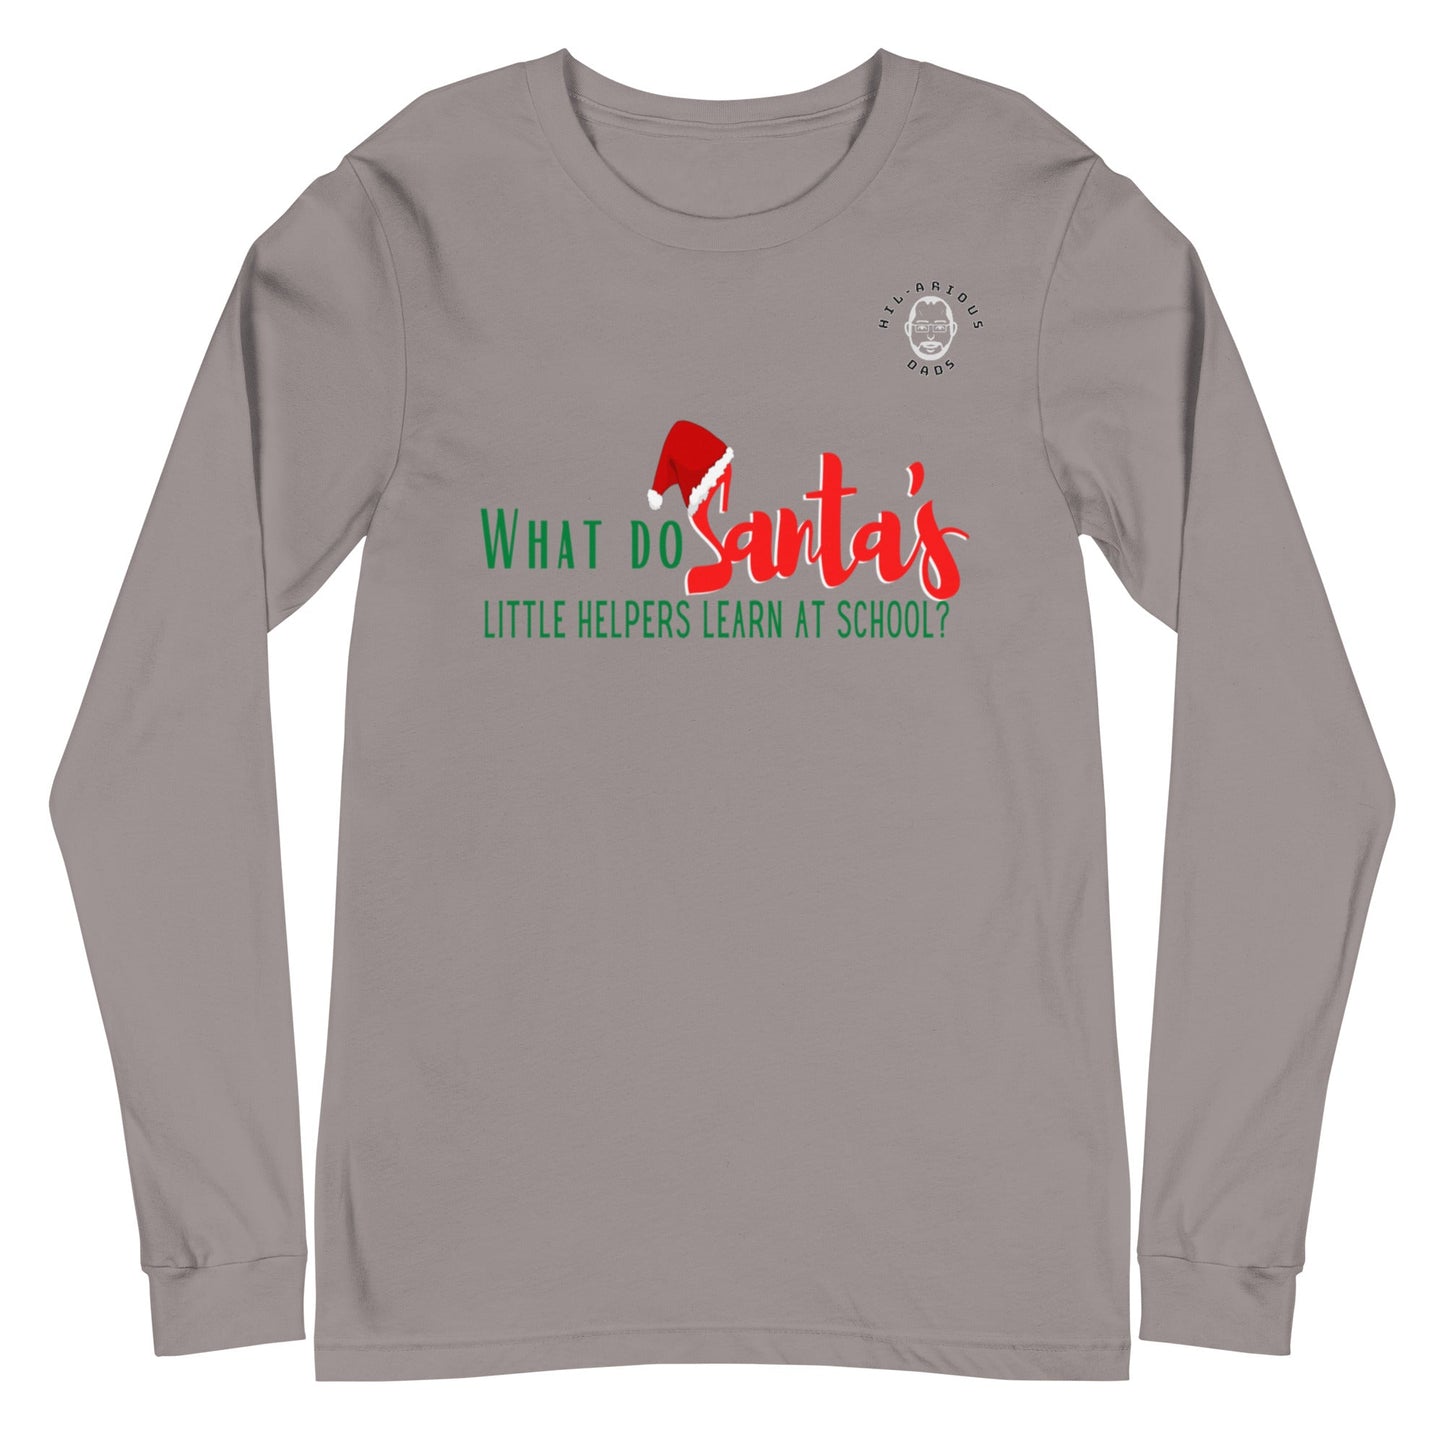 What do Santa’s little helpers learn at school?-Long Sleeve Tee - Hil-arious Dads